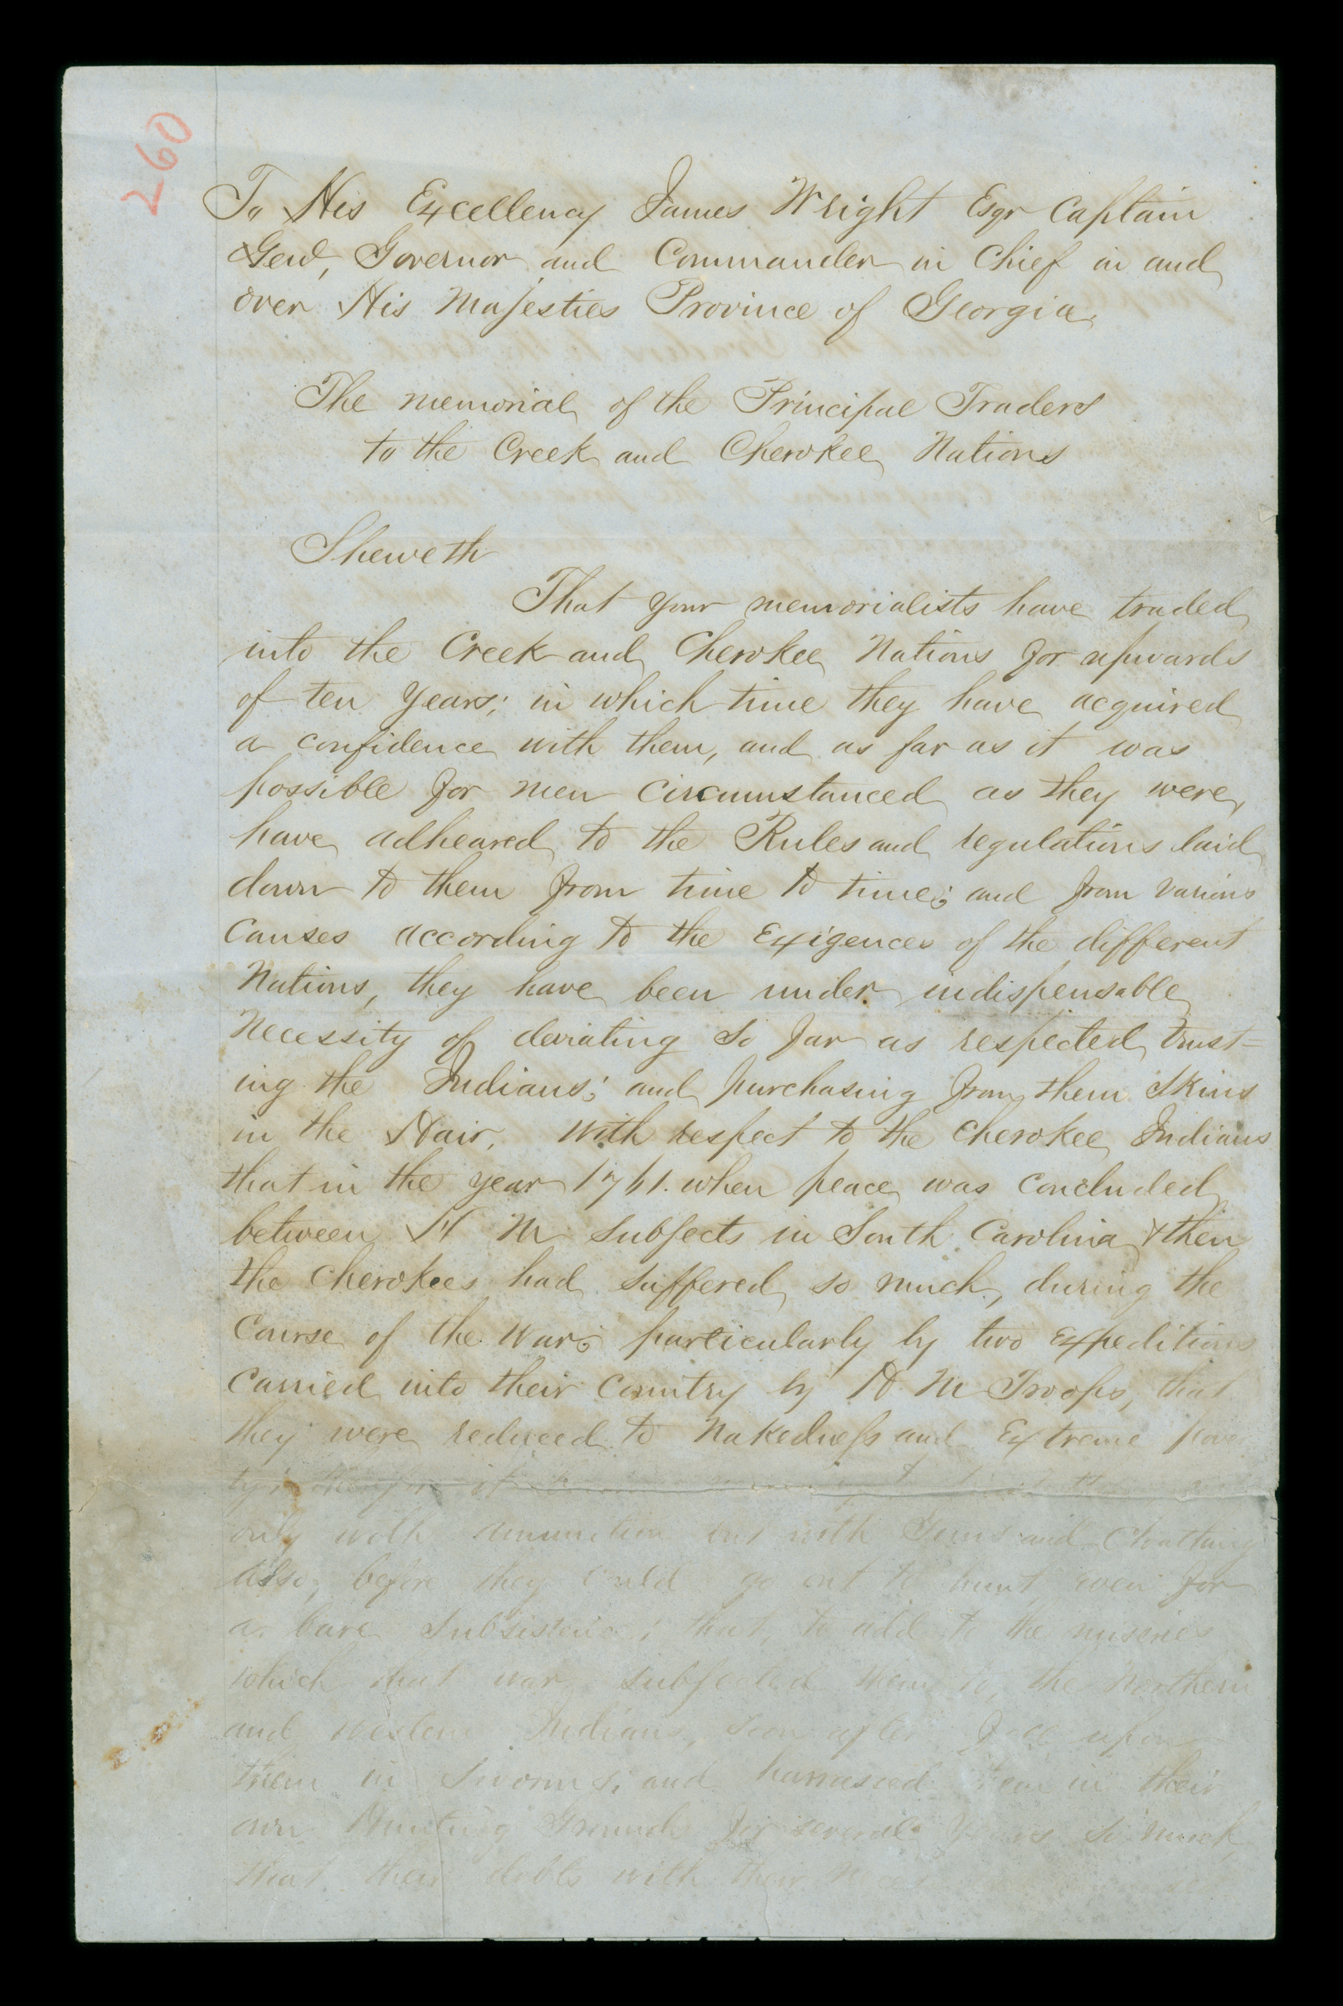 Miscellaneous papers relating to the settlement of the Galphin Claim, Memorial, Page 1